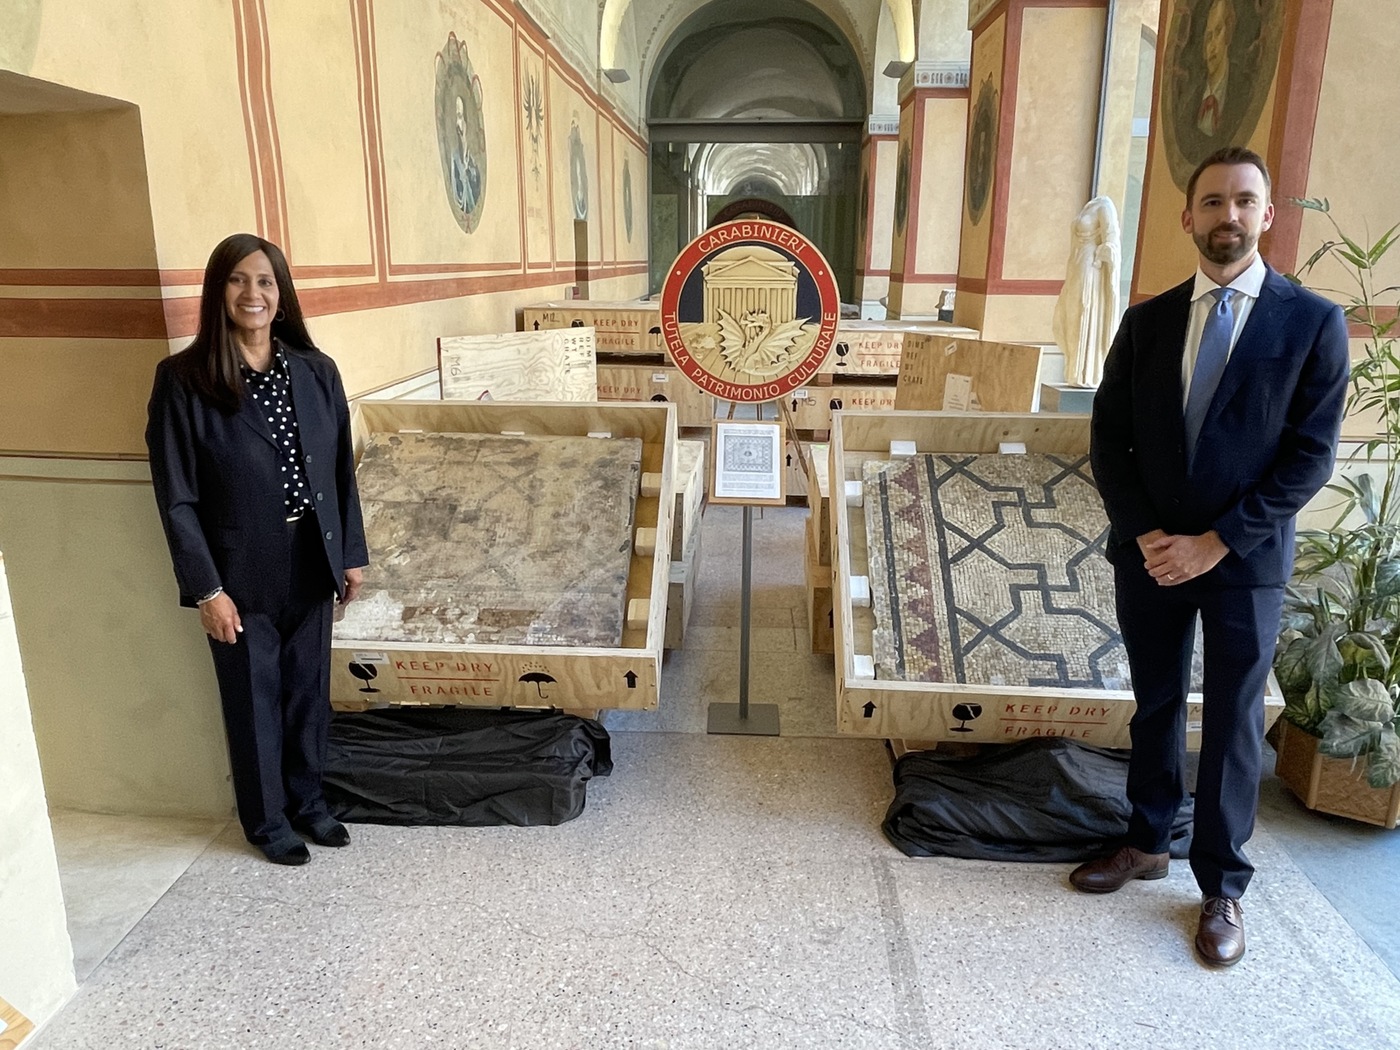 FBI art crime investigators pose with pieces of a 2,000-year-old Italian mosaic that they helped return to the country.